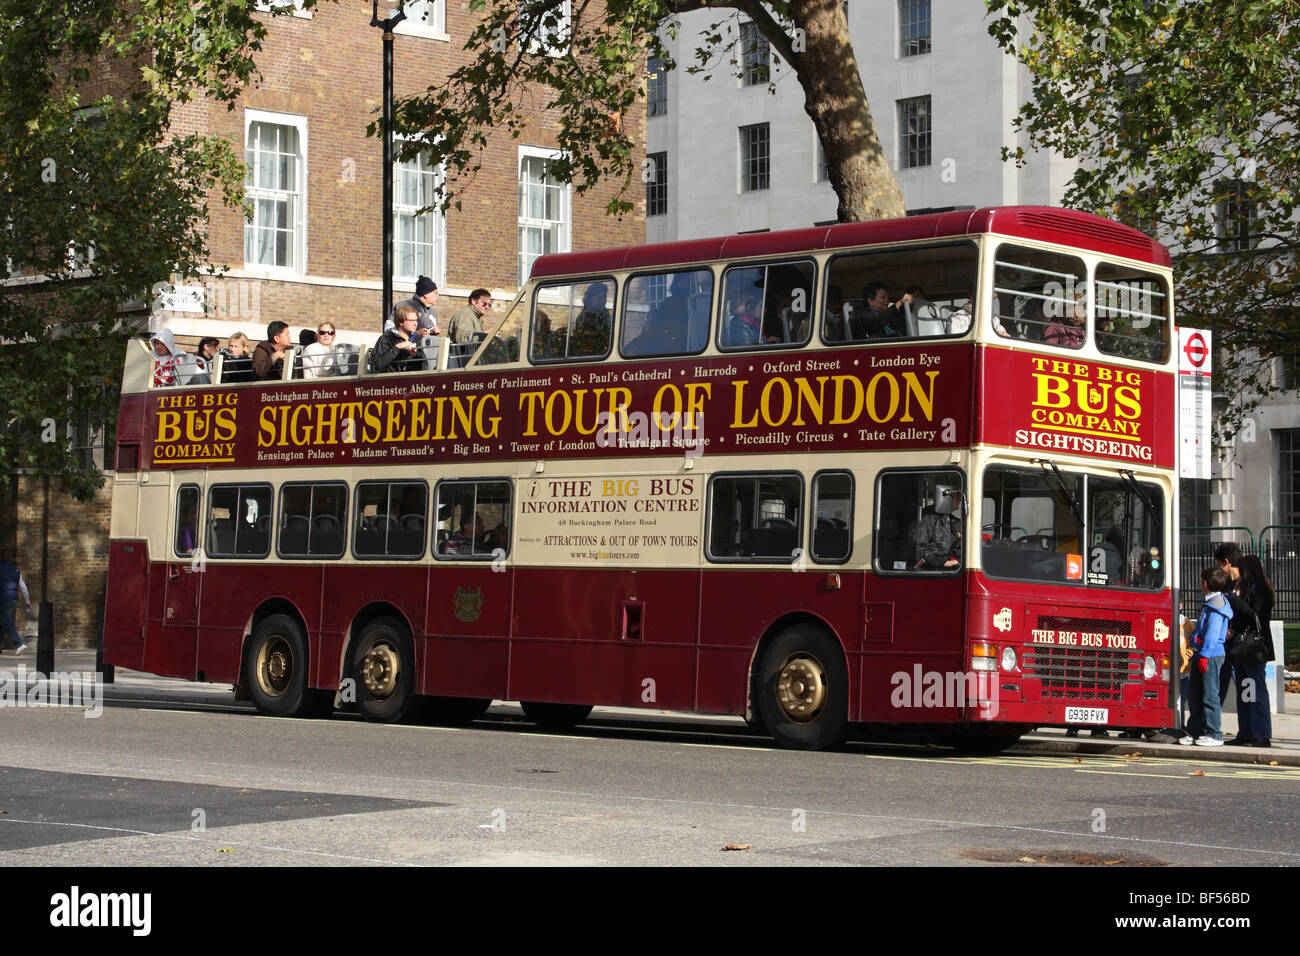 The Big Bus Company open top sightseeing tour bus in London, England, U.K. Stock Photo